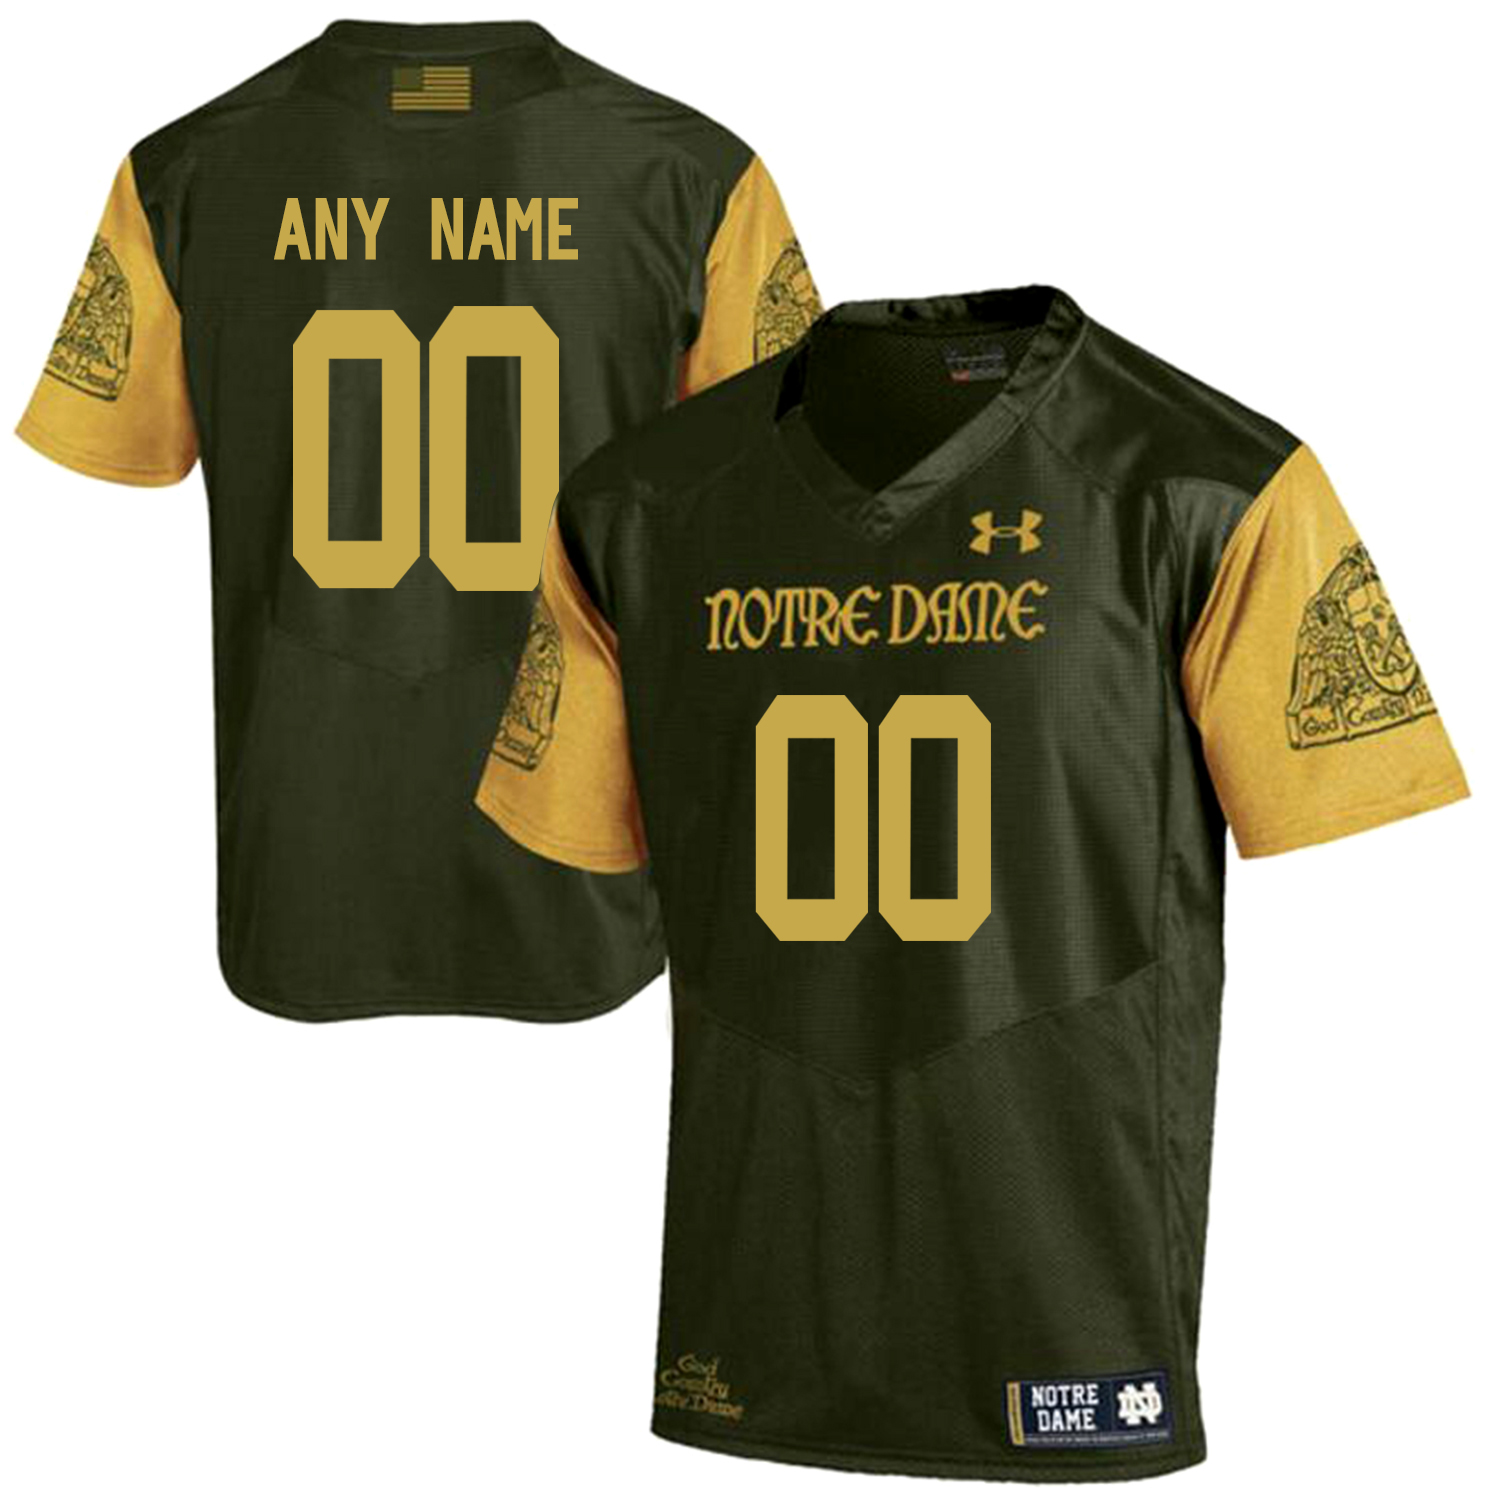 Notre Dame Fighting Irish Olive Green Men's Customized College Football Jersey